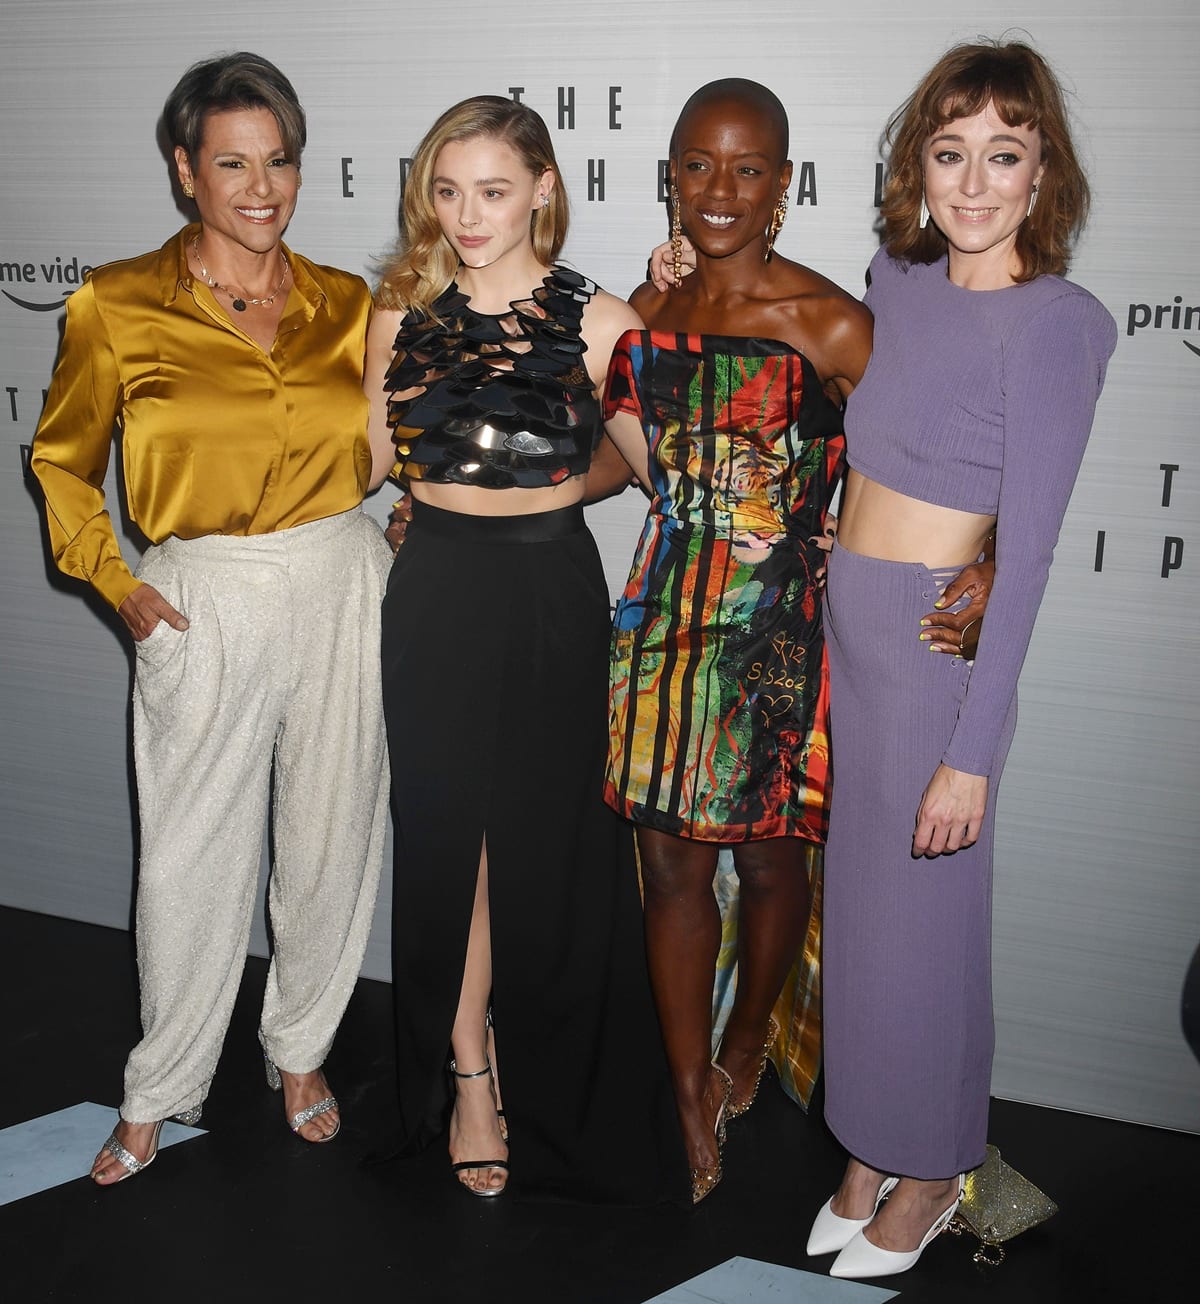 Chloë Grace Moretz looks much shorter than Alexandra Billings, T'Nia Miller, and Adelind Horan at Amazon Prime Video's 